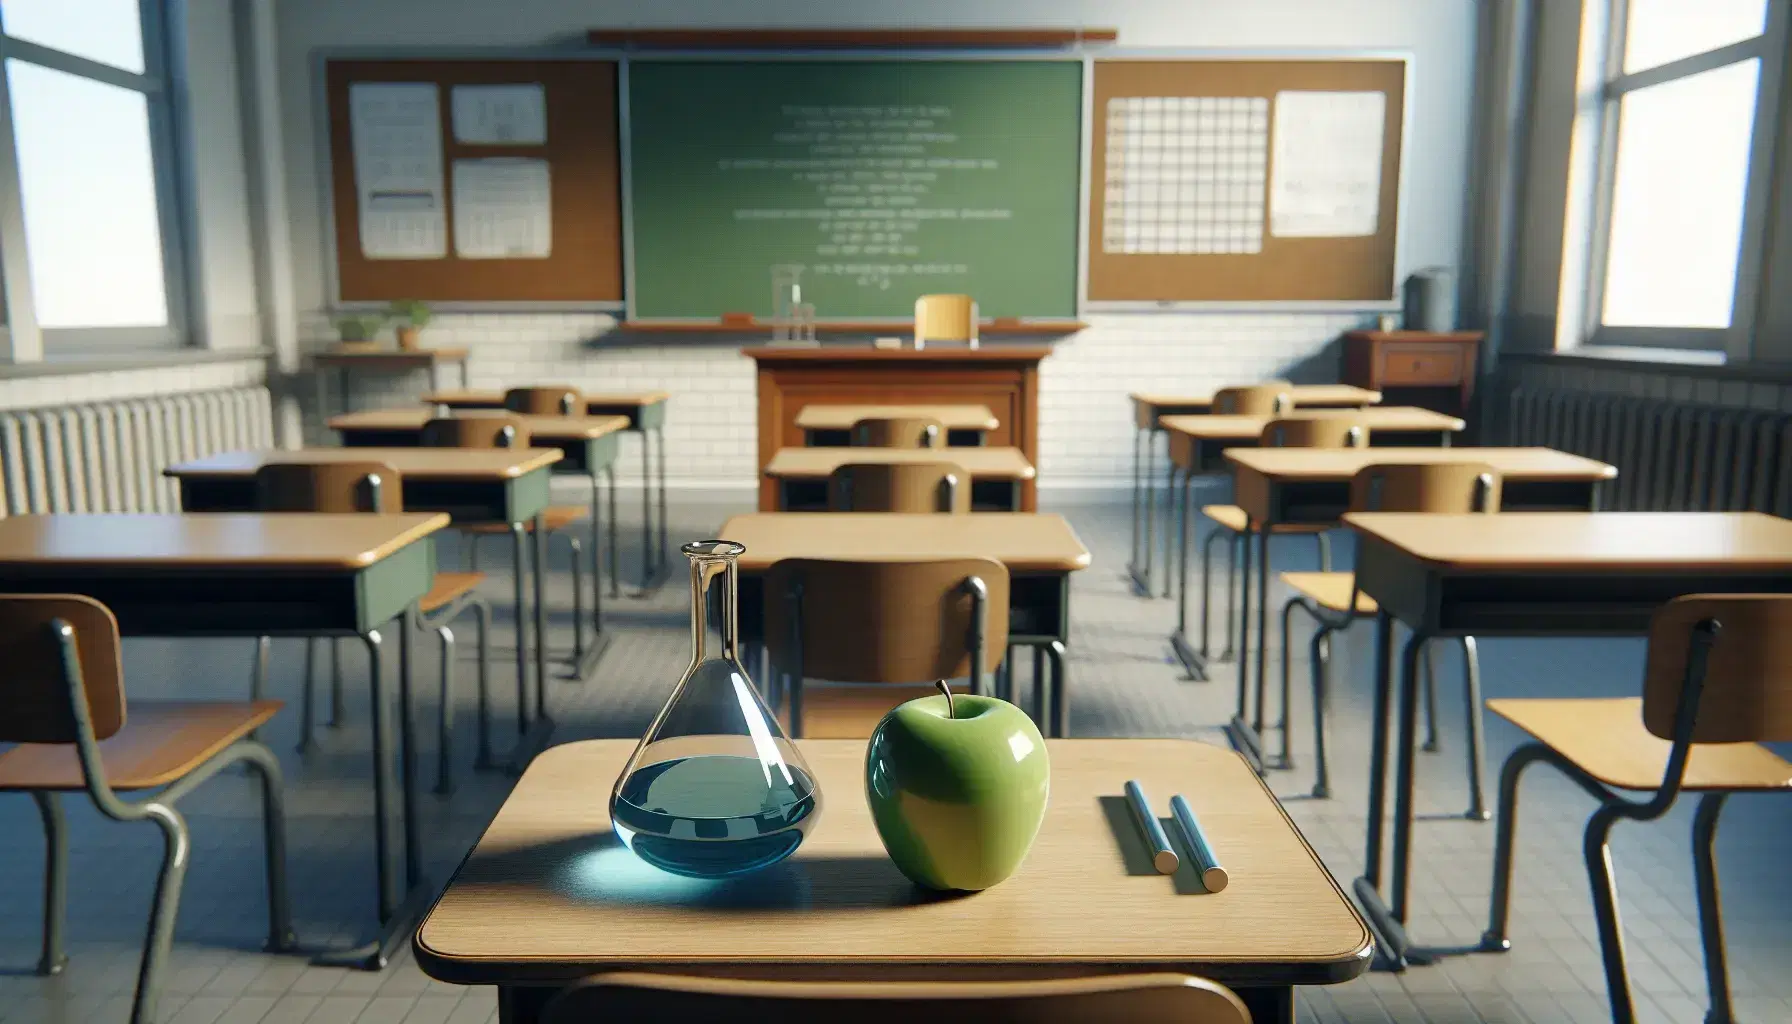 Classic classroom with a wooden teacher's desk, a glossy green apple, a blue liquid-filled flask, empty student desks, and a clean chalkboard.